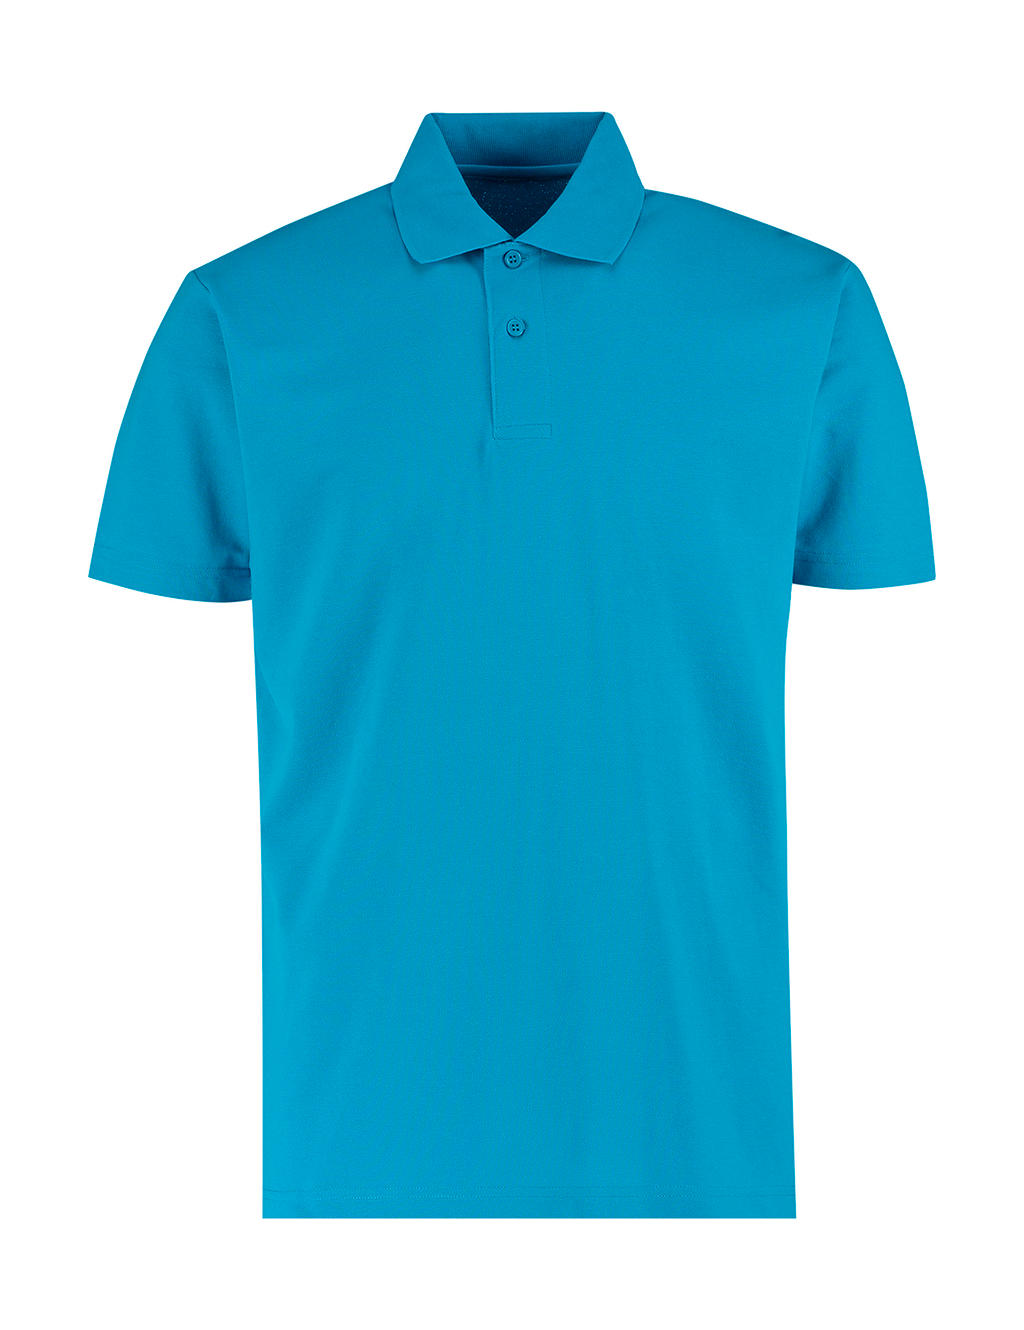  Mens Regular Fit Workforce Polo in Farbe Turquoise